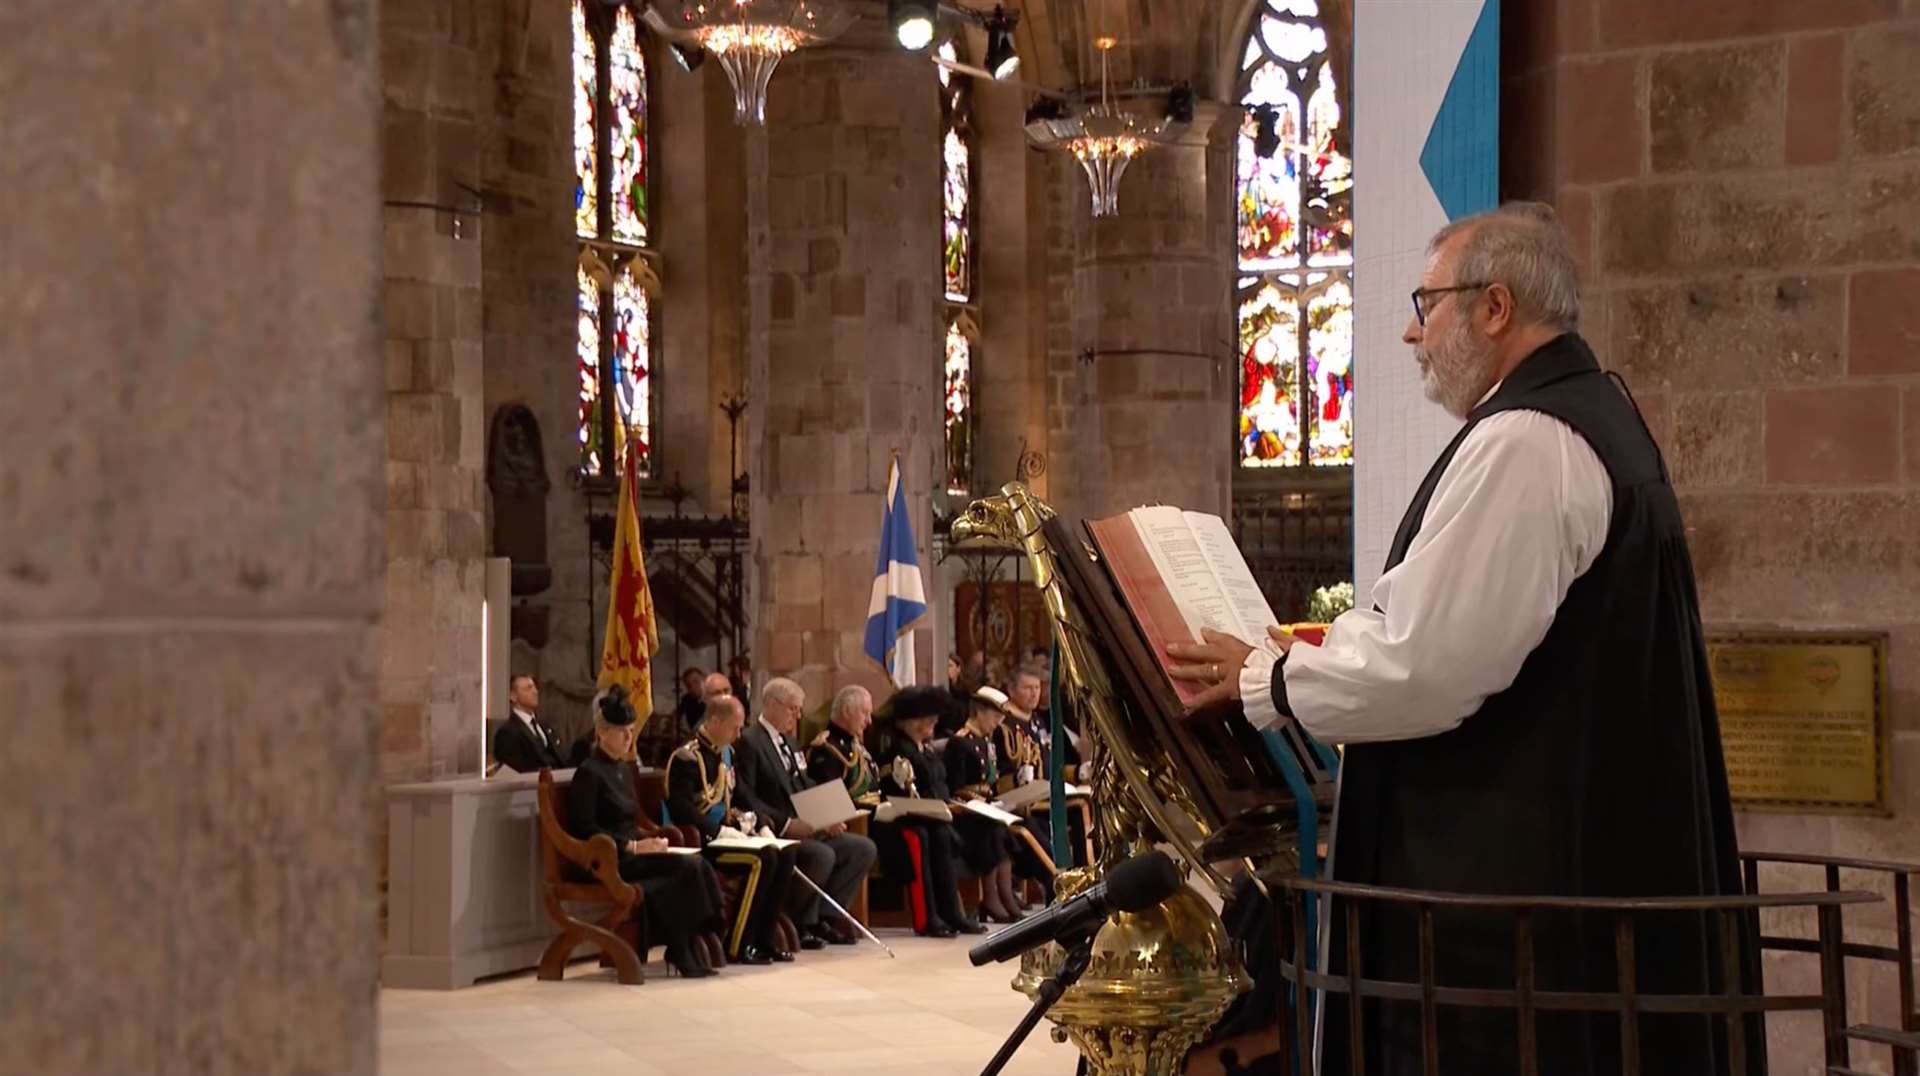 Bishop Mark Strange at the service of thanksgiving for the life of The Queen at St Giles Cathedral in Edinburgh.